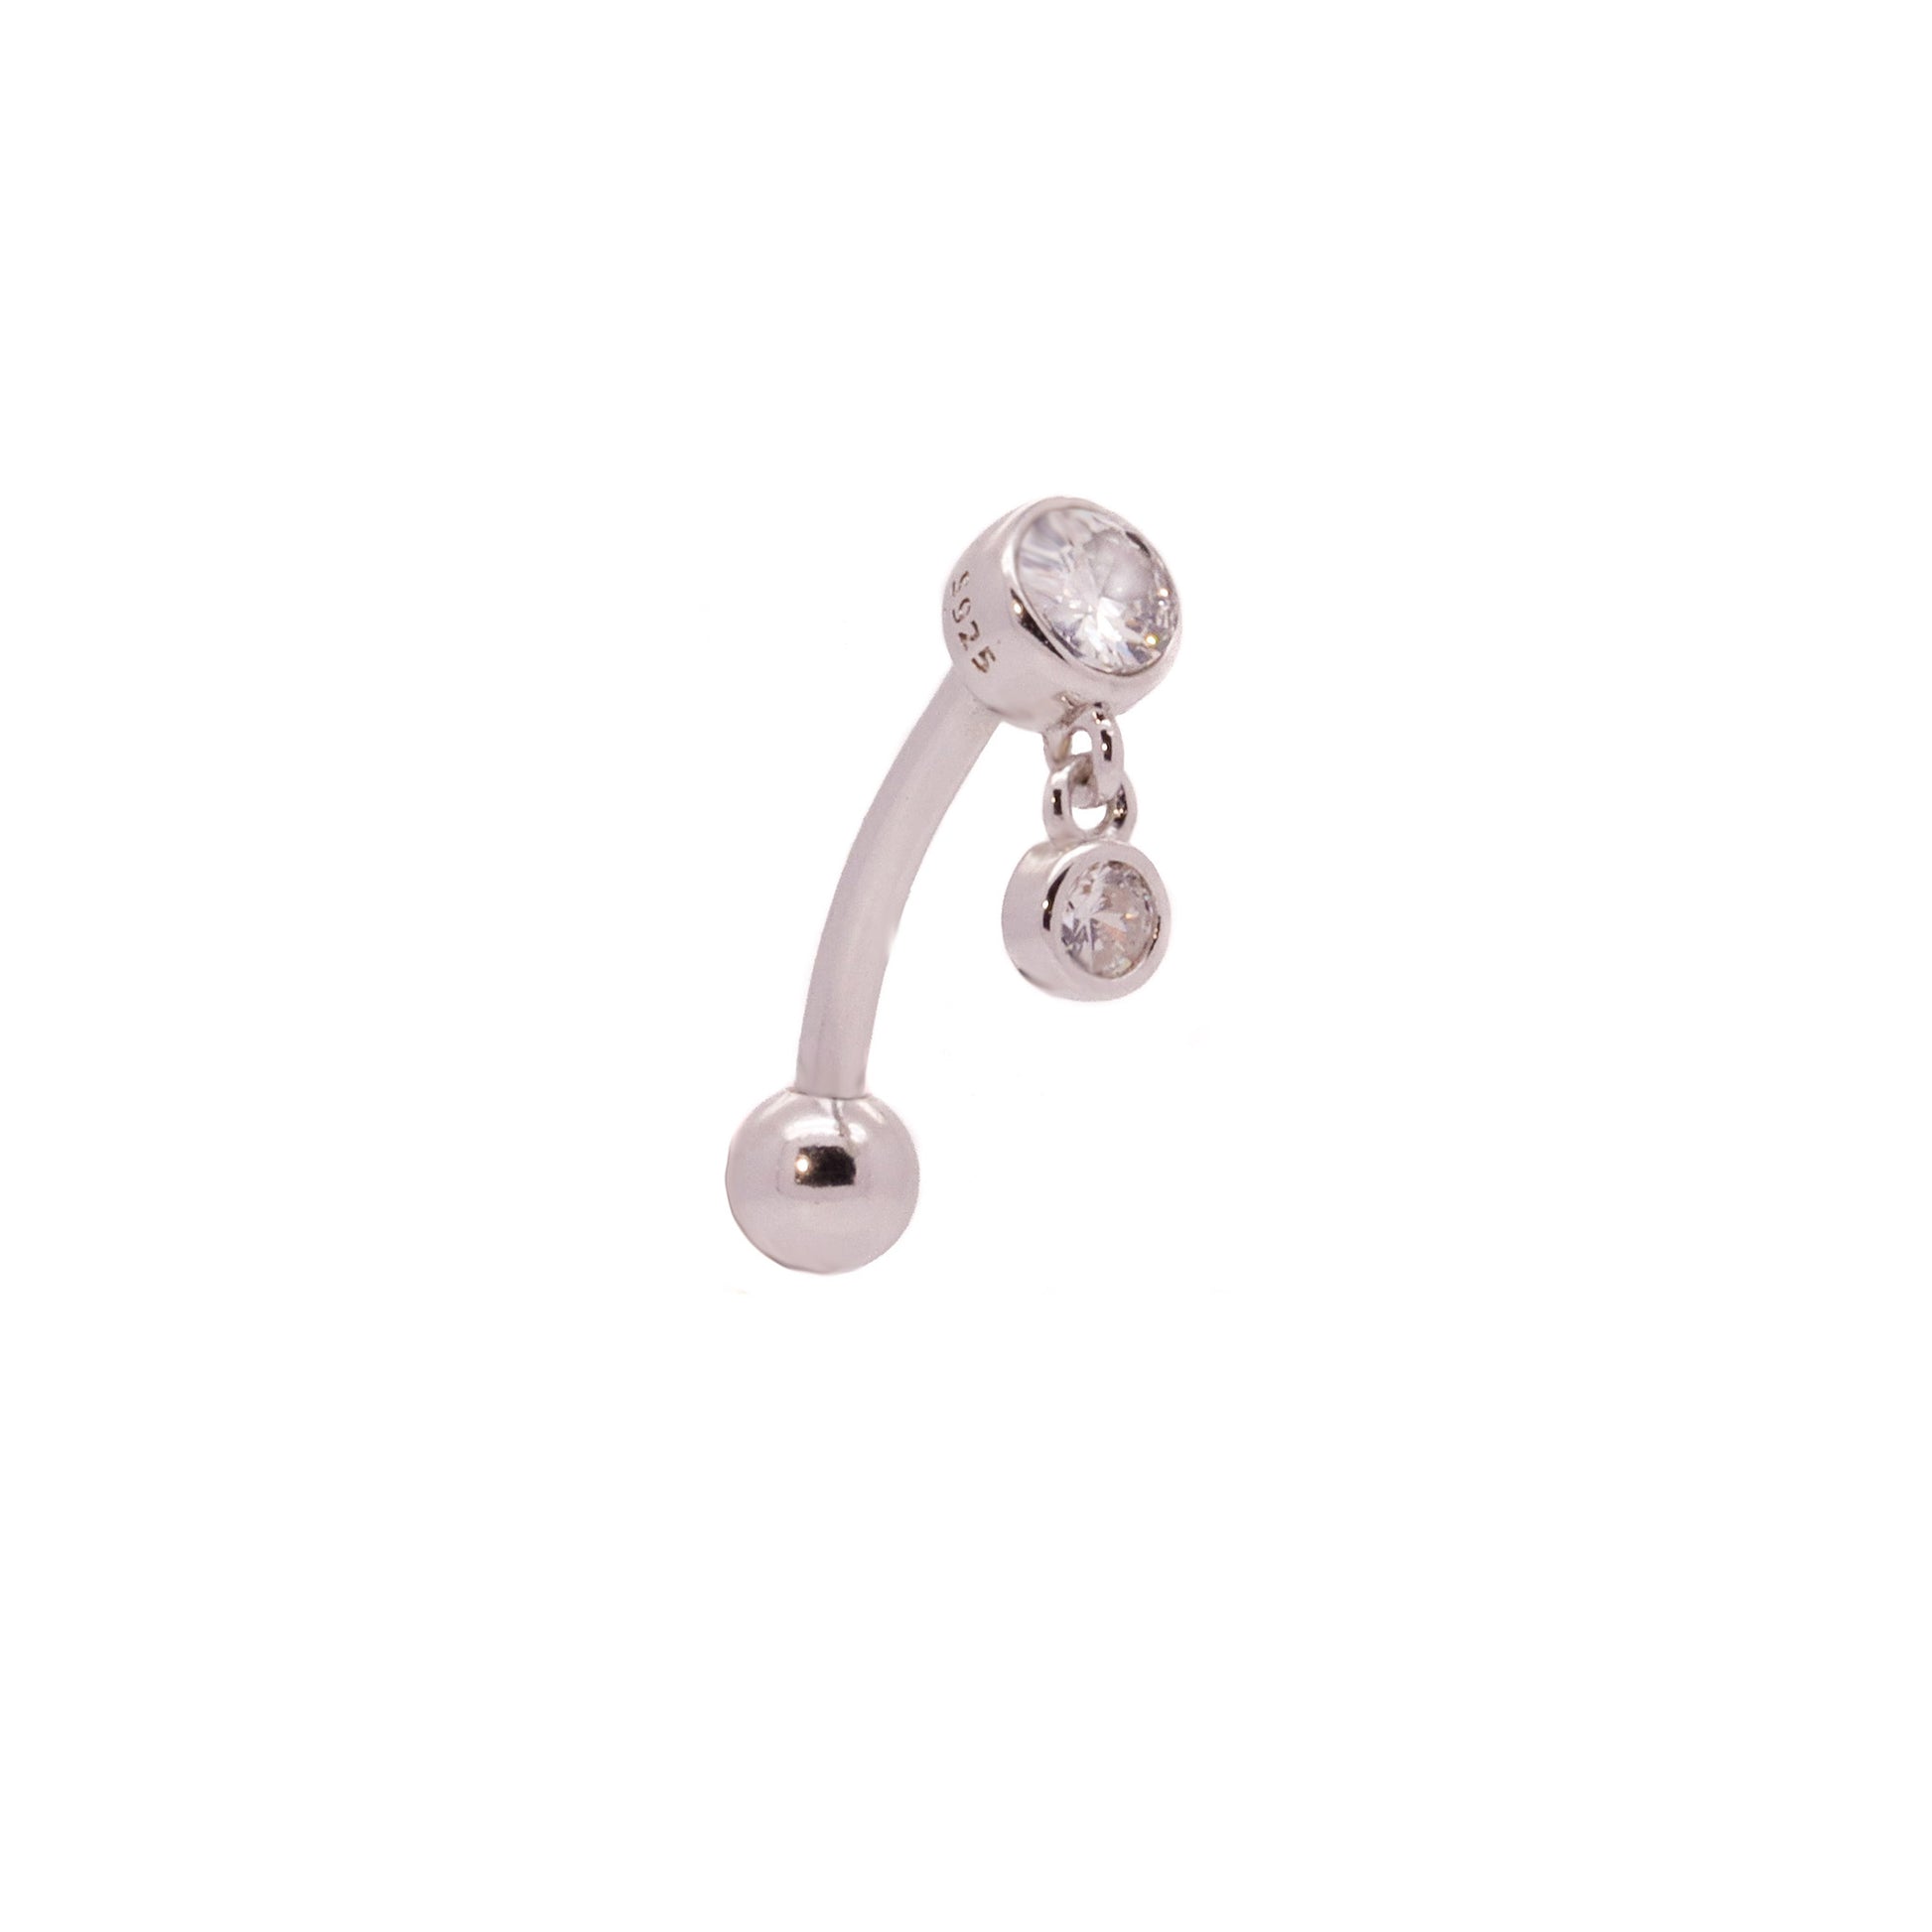 Solid 925 Silver | 16G 14G Petite Charm Dangle Reverse Belly Ring | 6mm 1/4" 8mm 5/16" 10mm 3/8" - Sturdy South